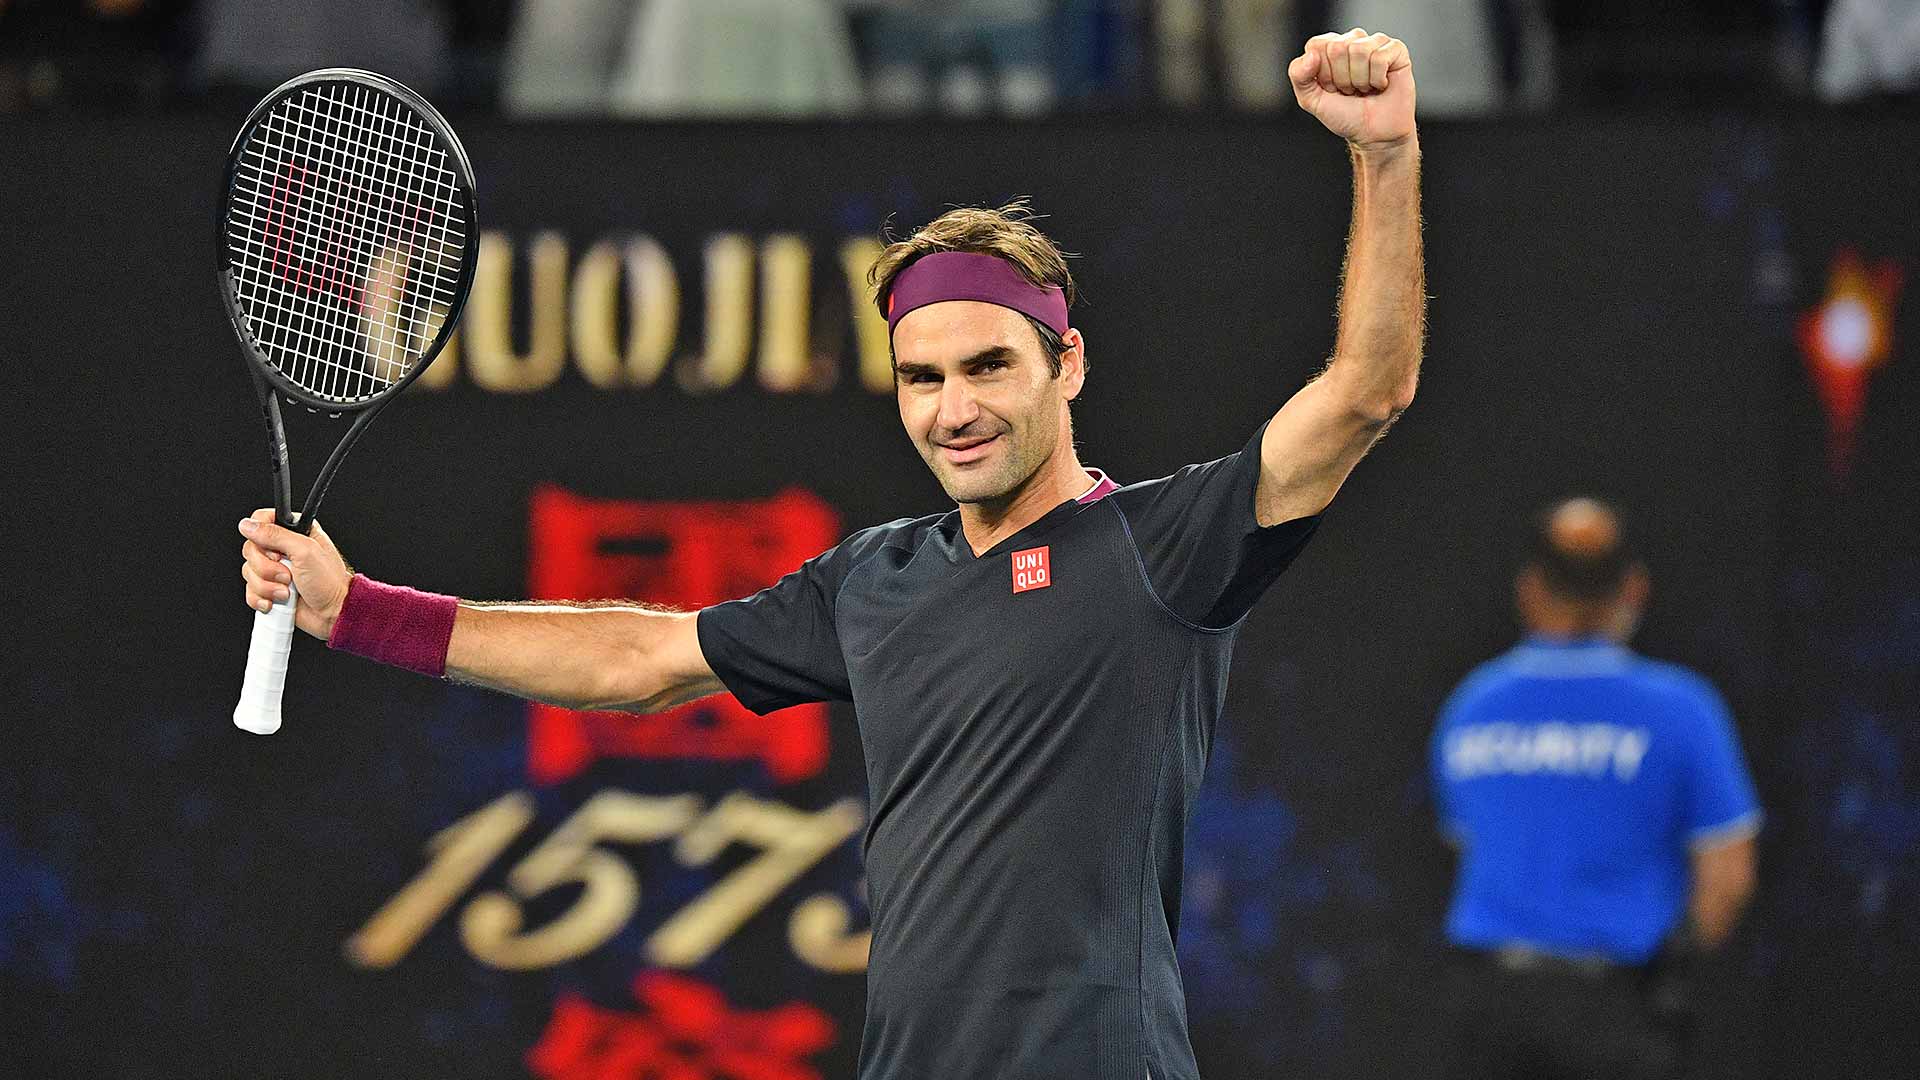 Roger Federer rallies from 4-8 in the deciding set match tie-break to reach the Australian Open fourth round.